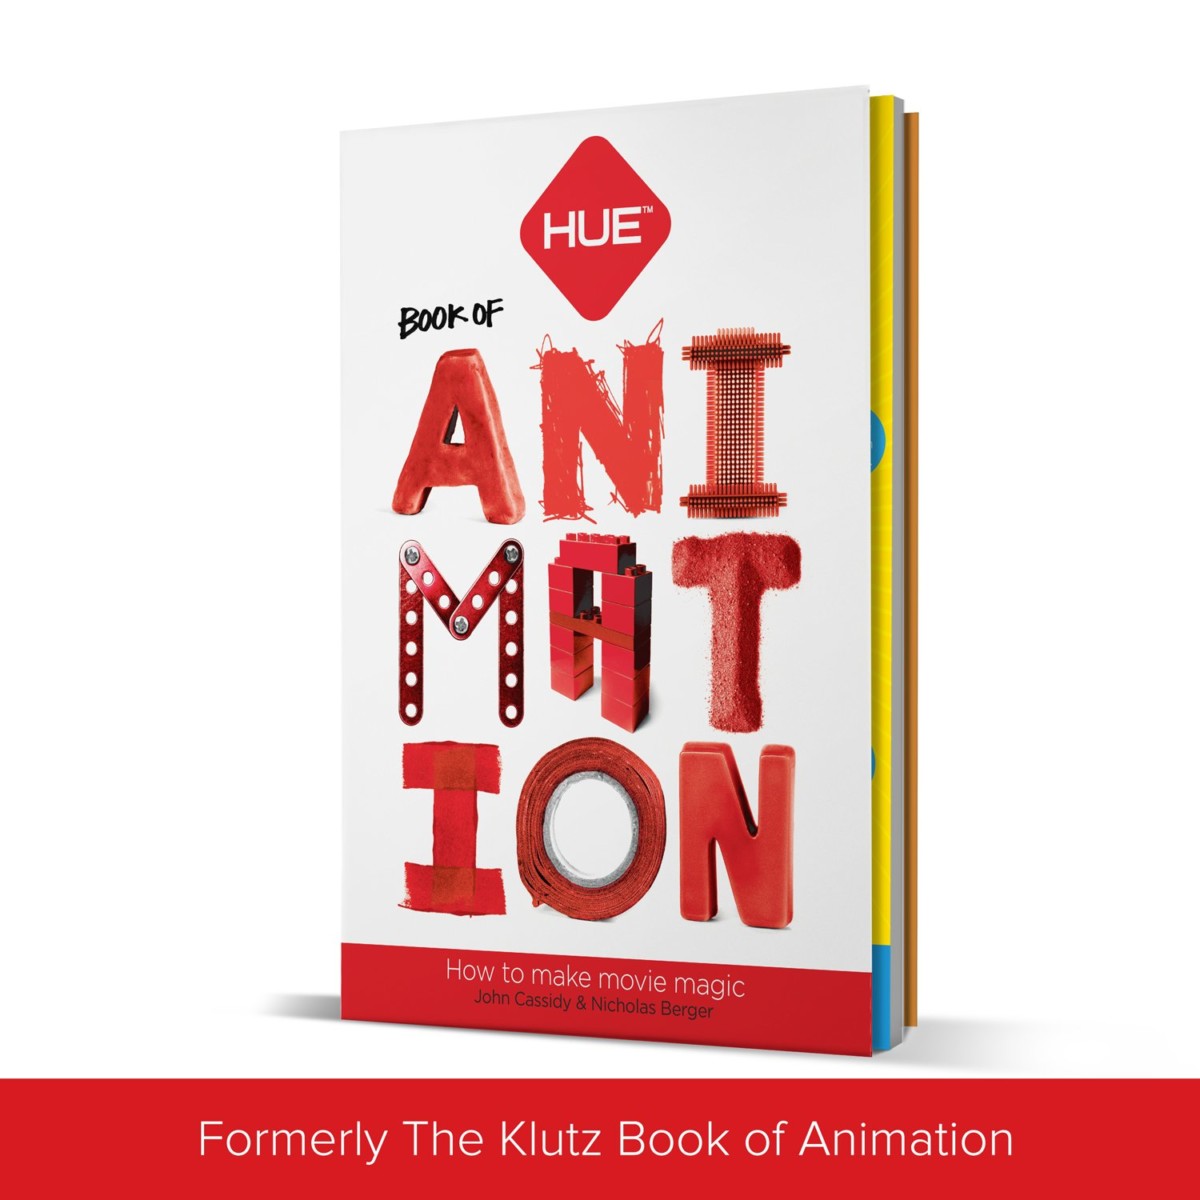 Hue Animation Studio - a Complete Stop-motion Animation Kit Giveaway -  Elizabeth's Kitchen Diary